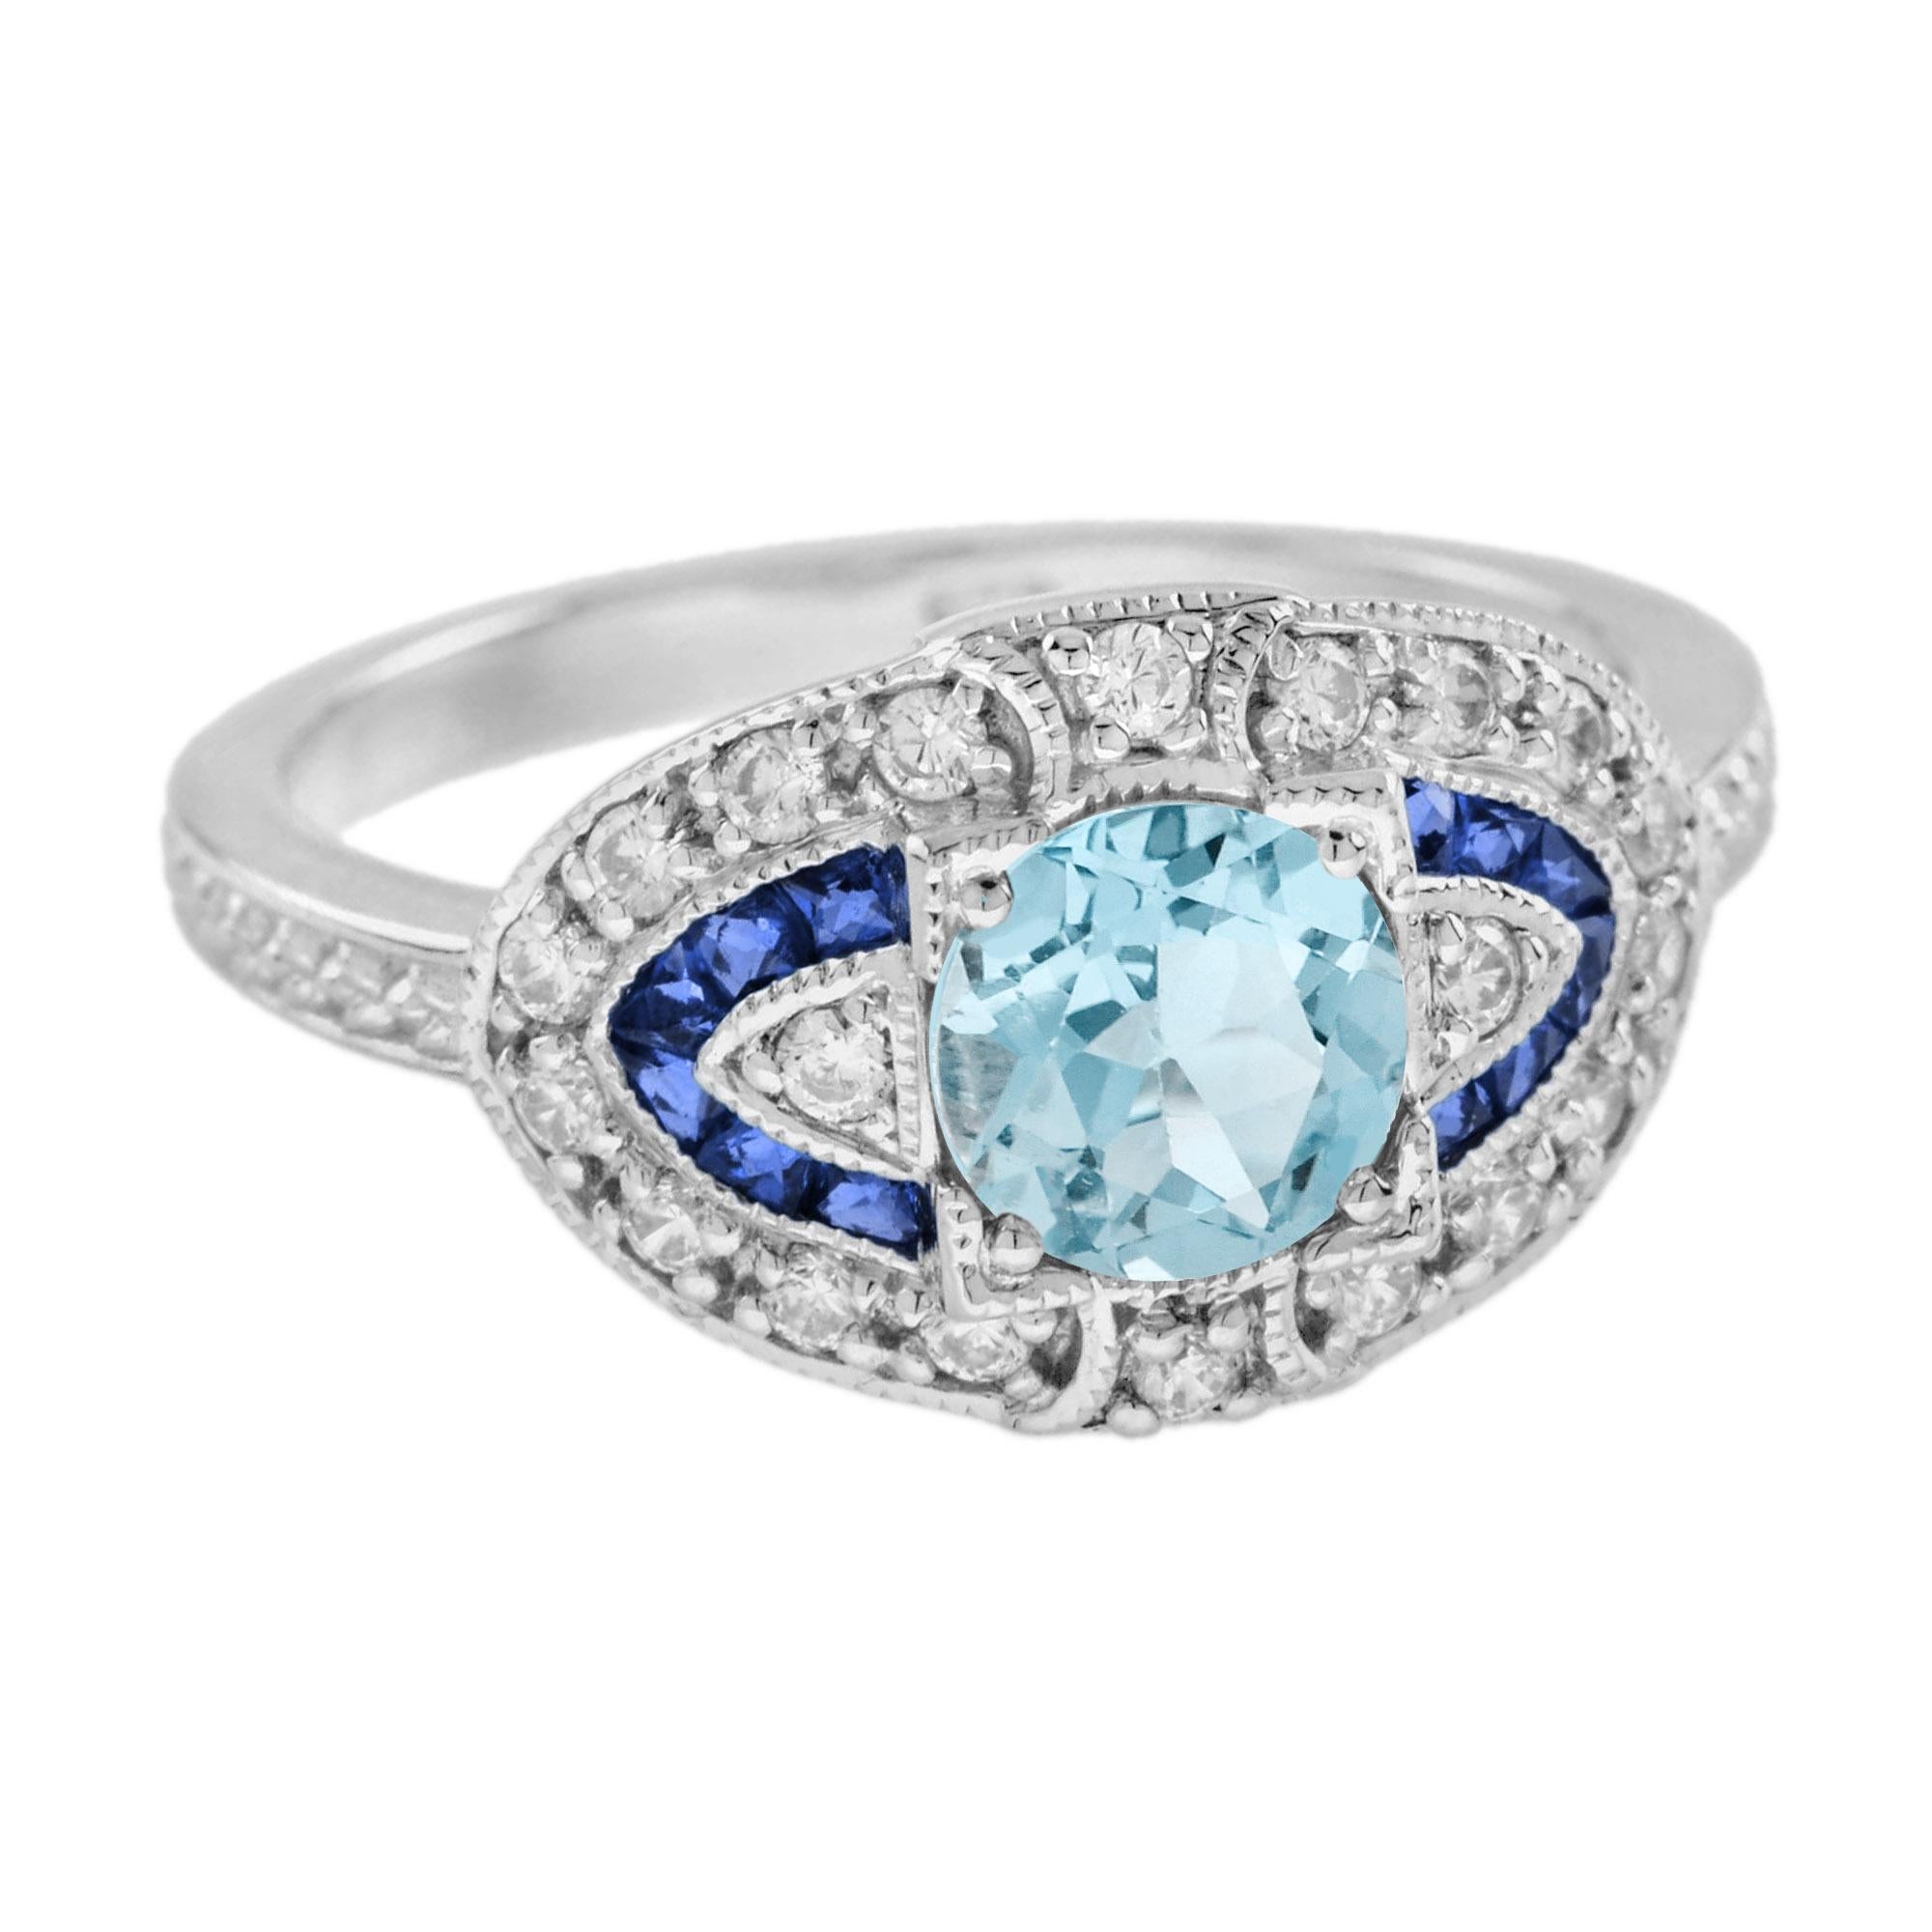 A very stylish Art Deco inspired gold ring set with round cut aquamarine with French cut blue sapphires and round diamonds around it and down the shoulders. The pale blue, transparent crystal is a member of Beryl family. It is a very pretty contrast